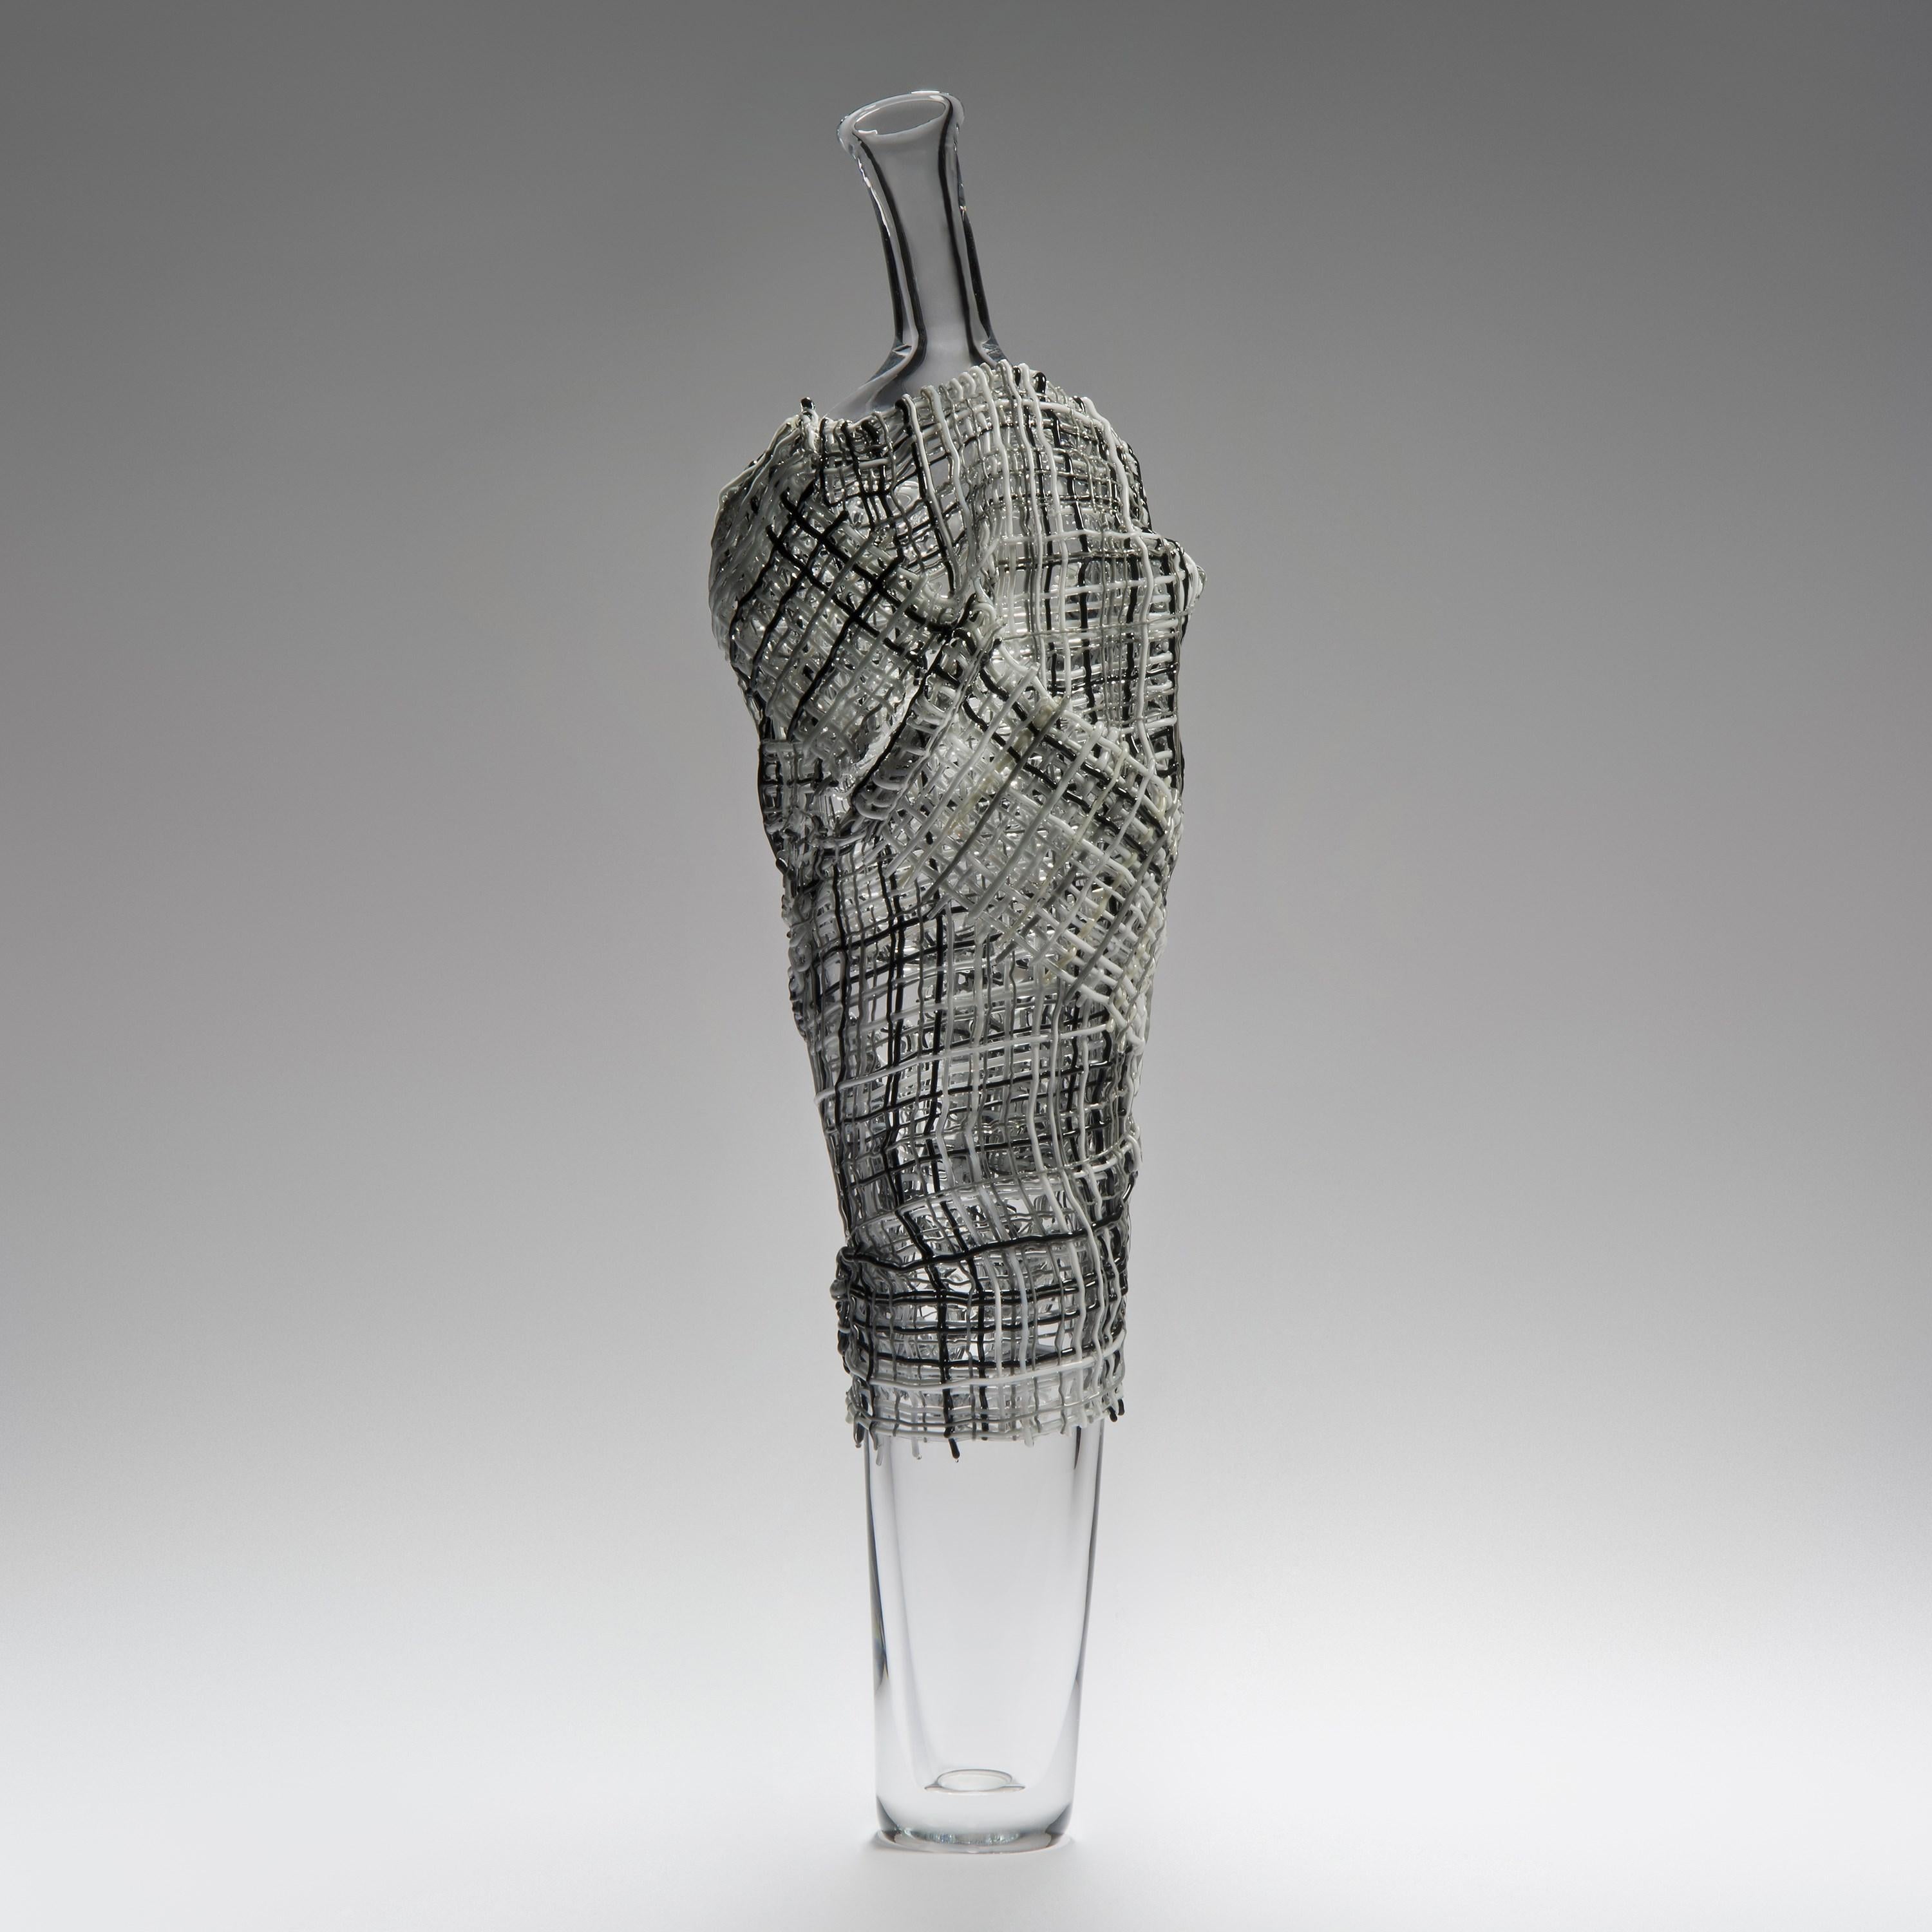 Classical Greek  Ares, a black, white & grey figurative glass sculpture by Cathryn Shilling